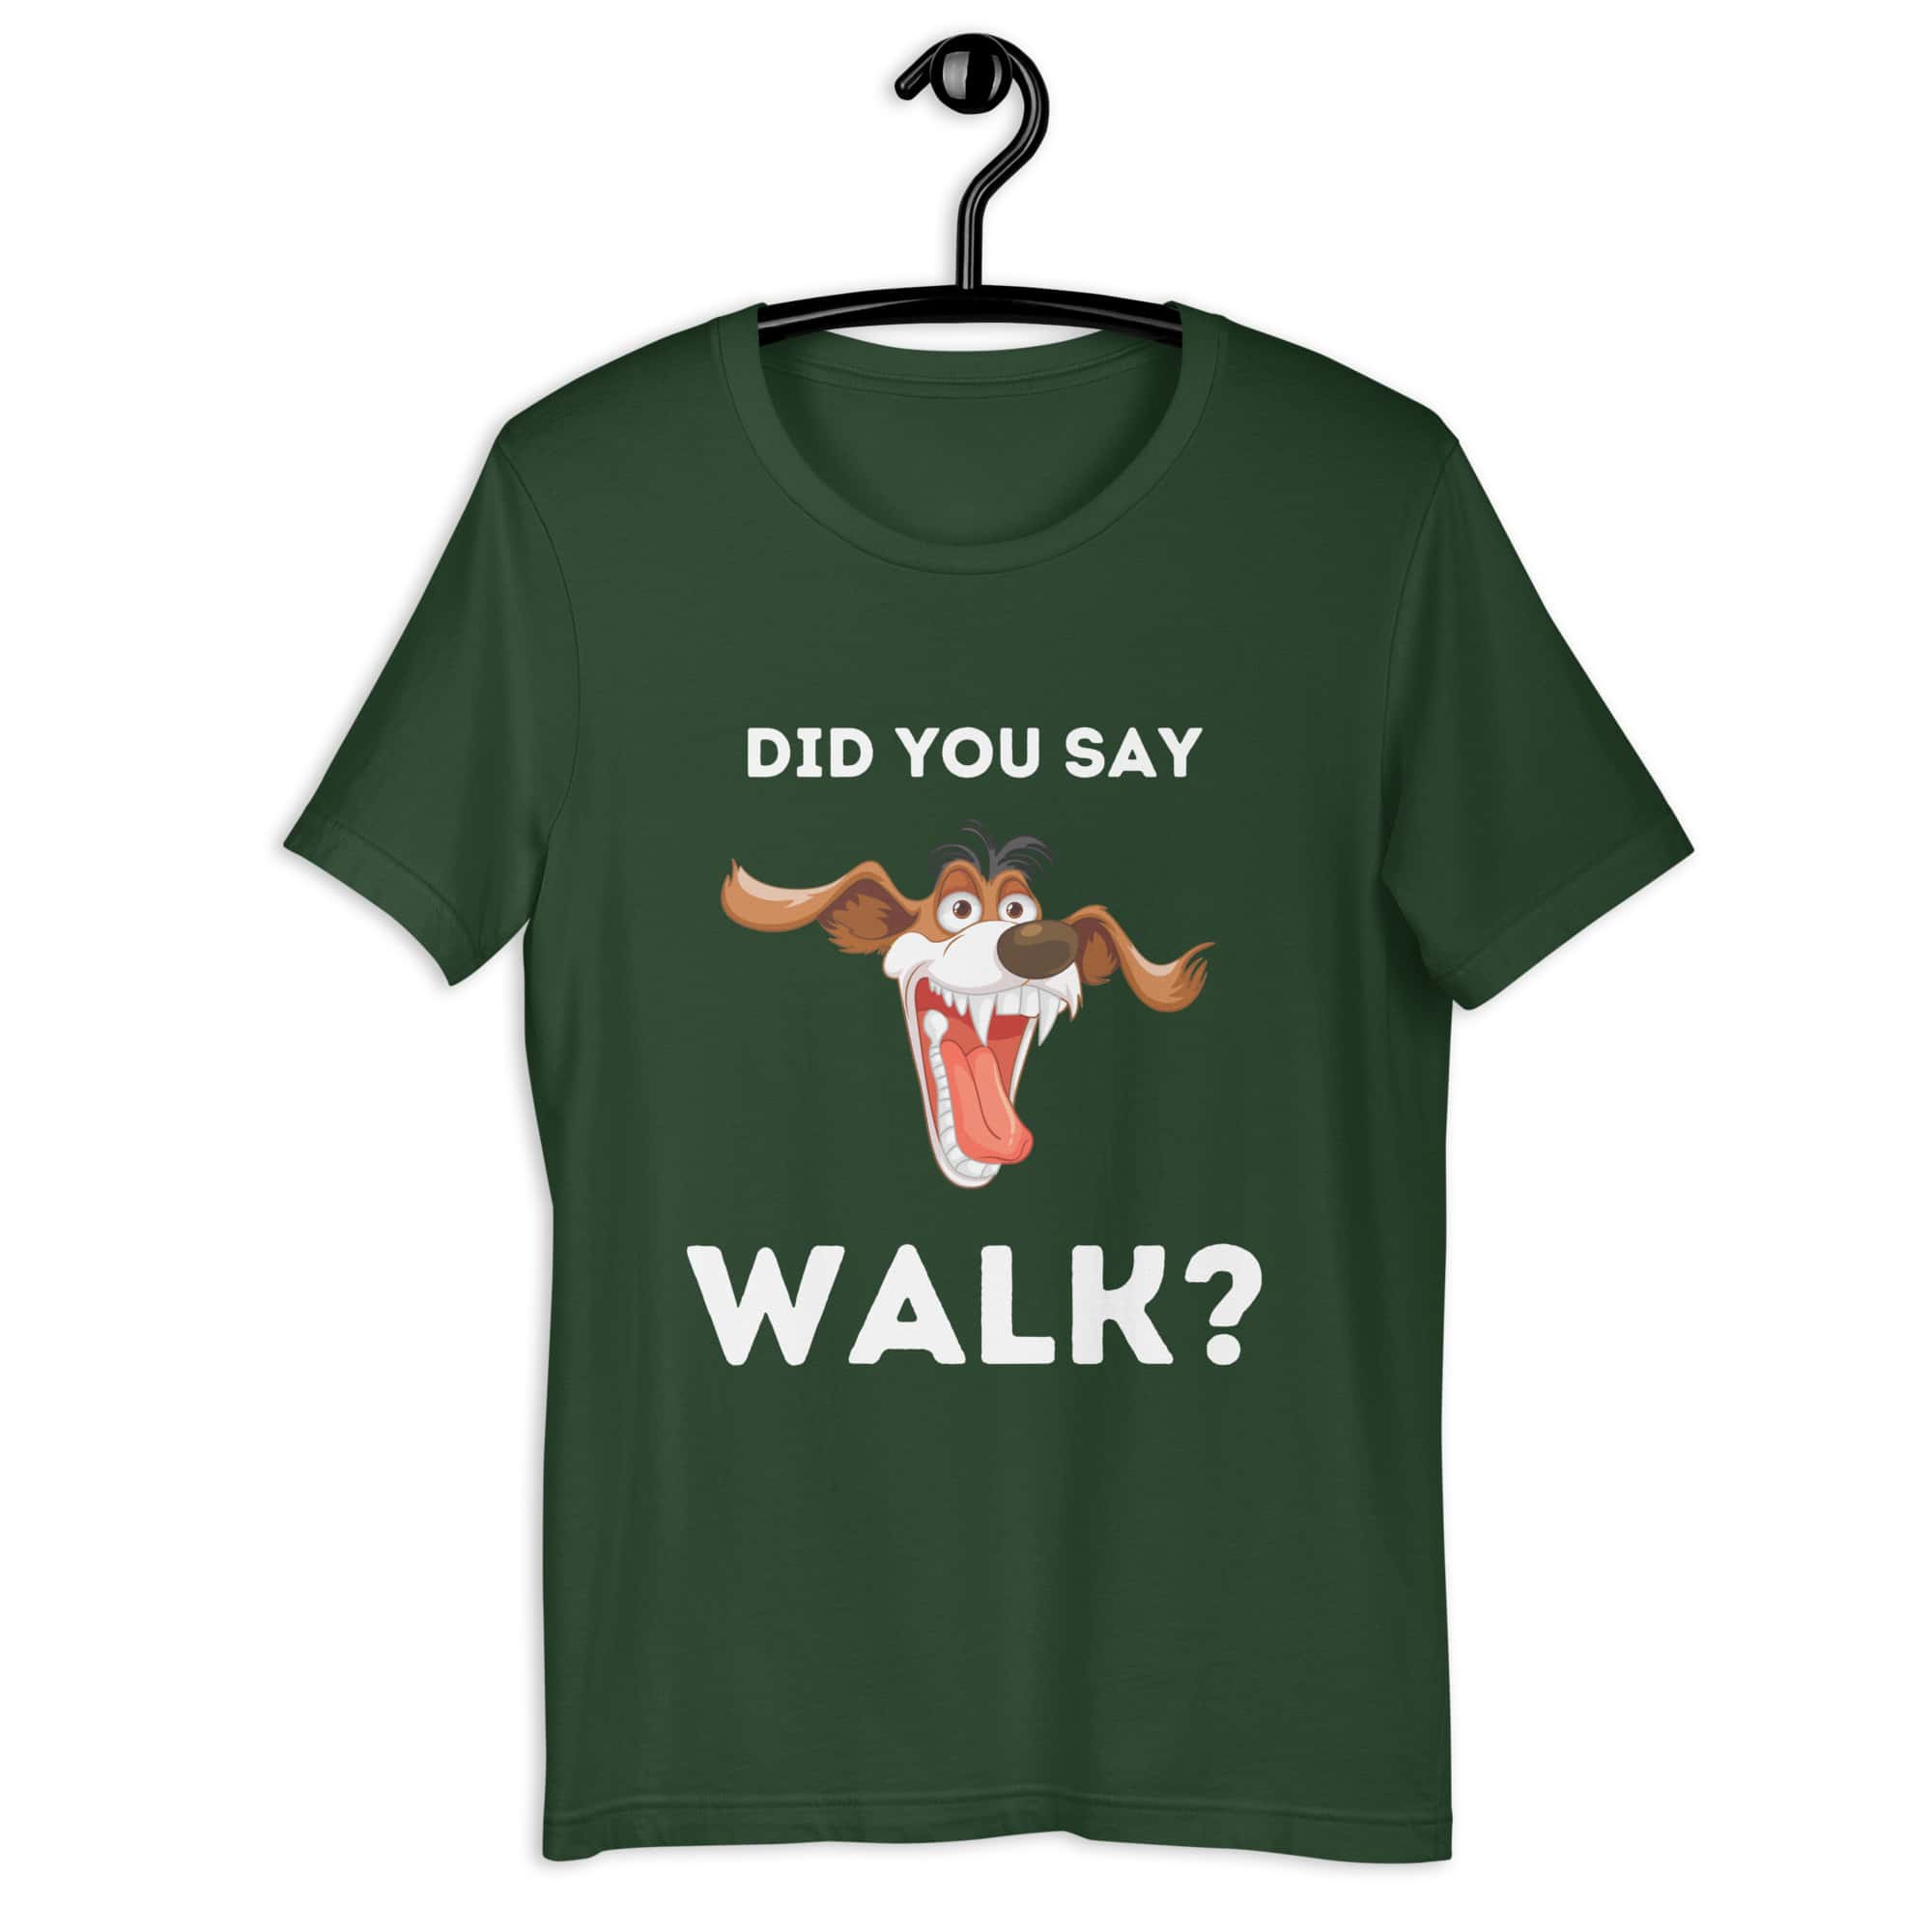 The "Funny 'Did You Say Walk?' Dog Unisex T-Shirt" captures the excitement dogs feel at the mention of a walk. Made from a comfortable, durable blend, it features a vibrant graphic that dog lovers will relate to. Available in various sizes and colors, it's perfect for casual wear, highlighting a universal moment in dog ownership with humor and style. Forest